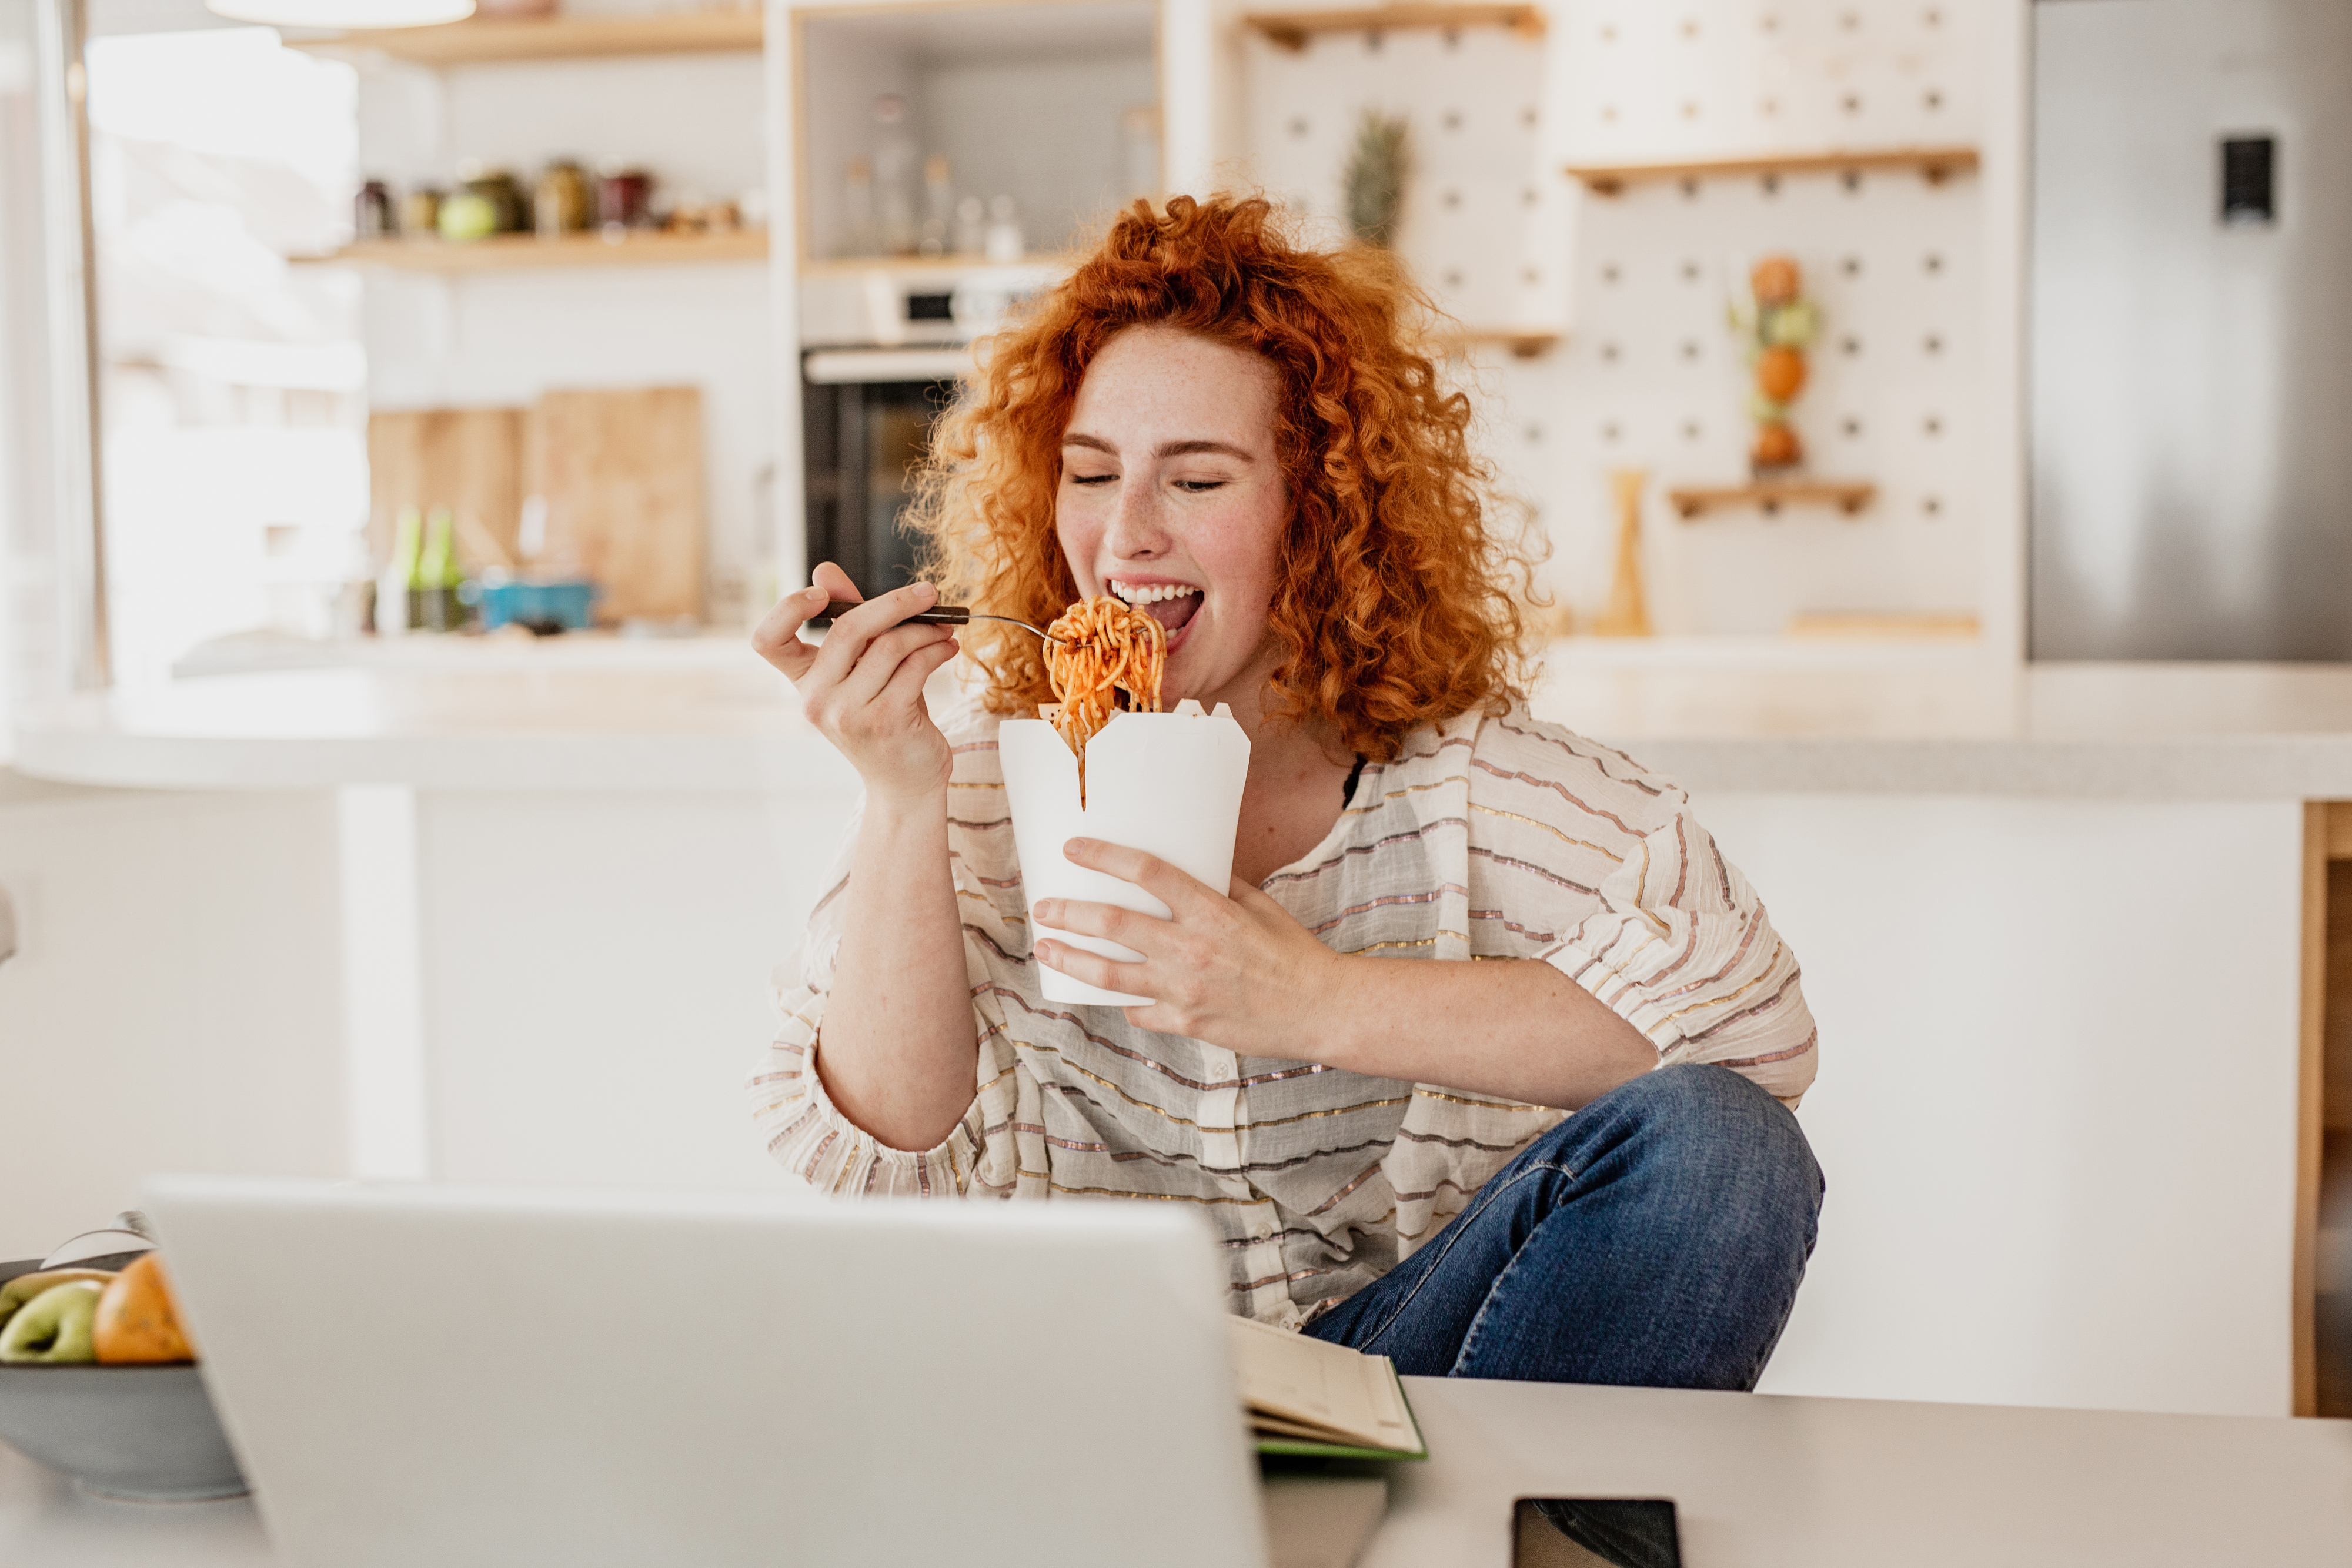 woman eating chinese takeout while smiling at her laptop and a book